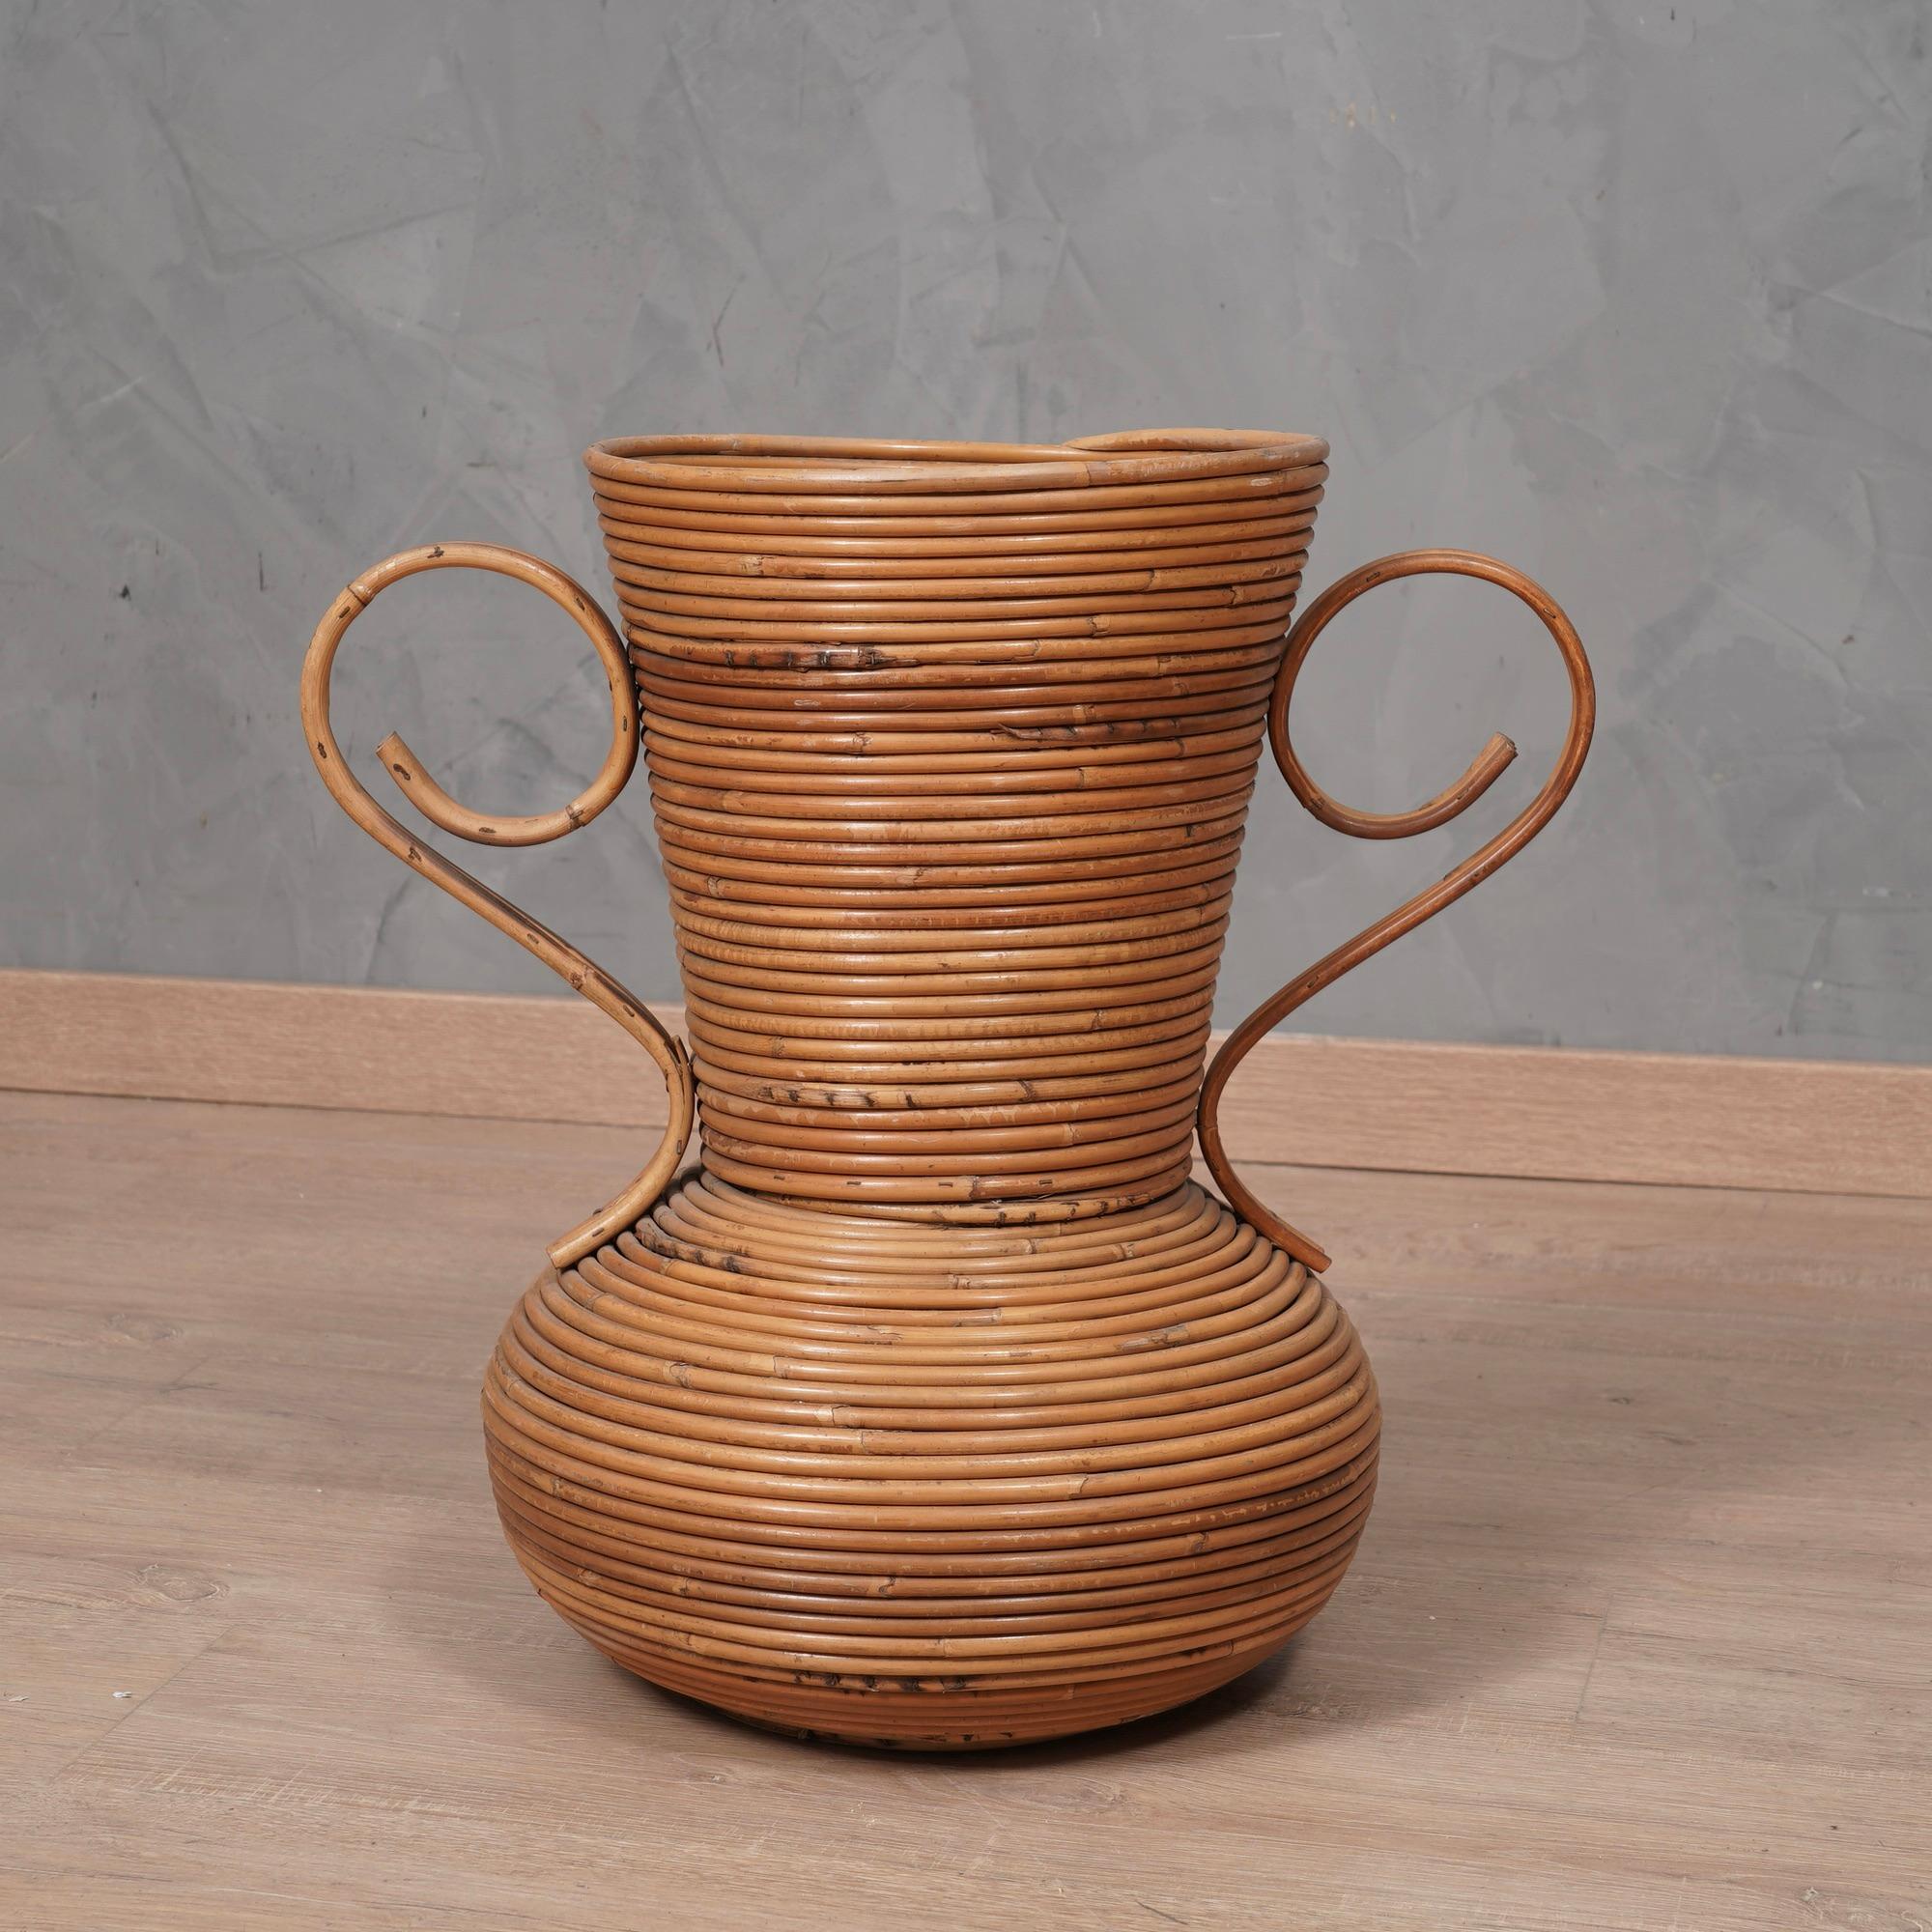 Elegance and refinement are the objective of these amphora vases for the 